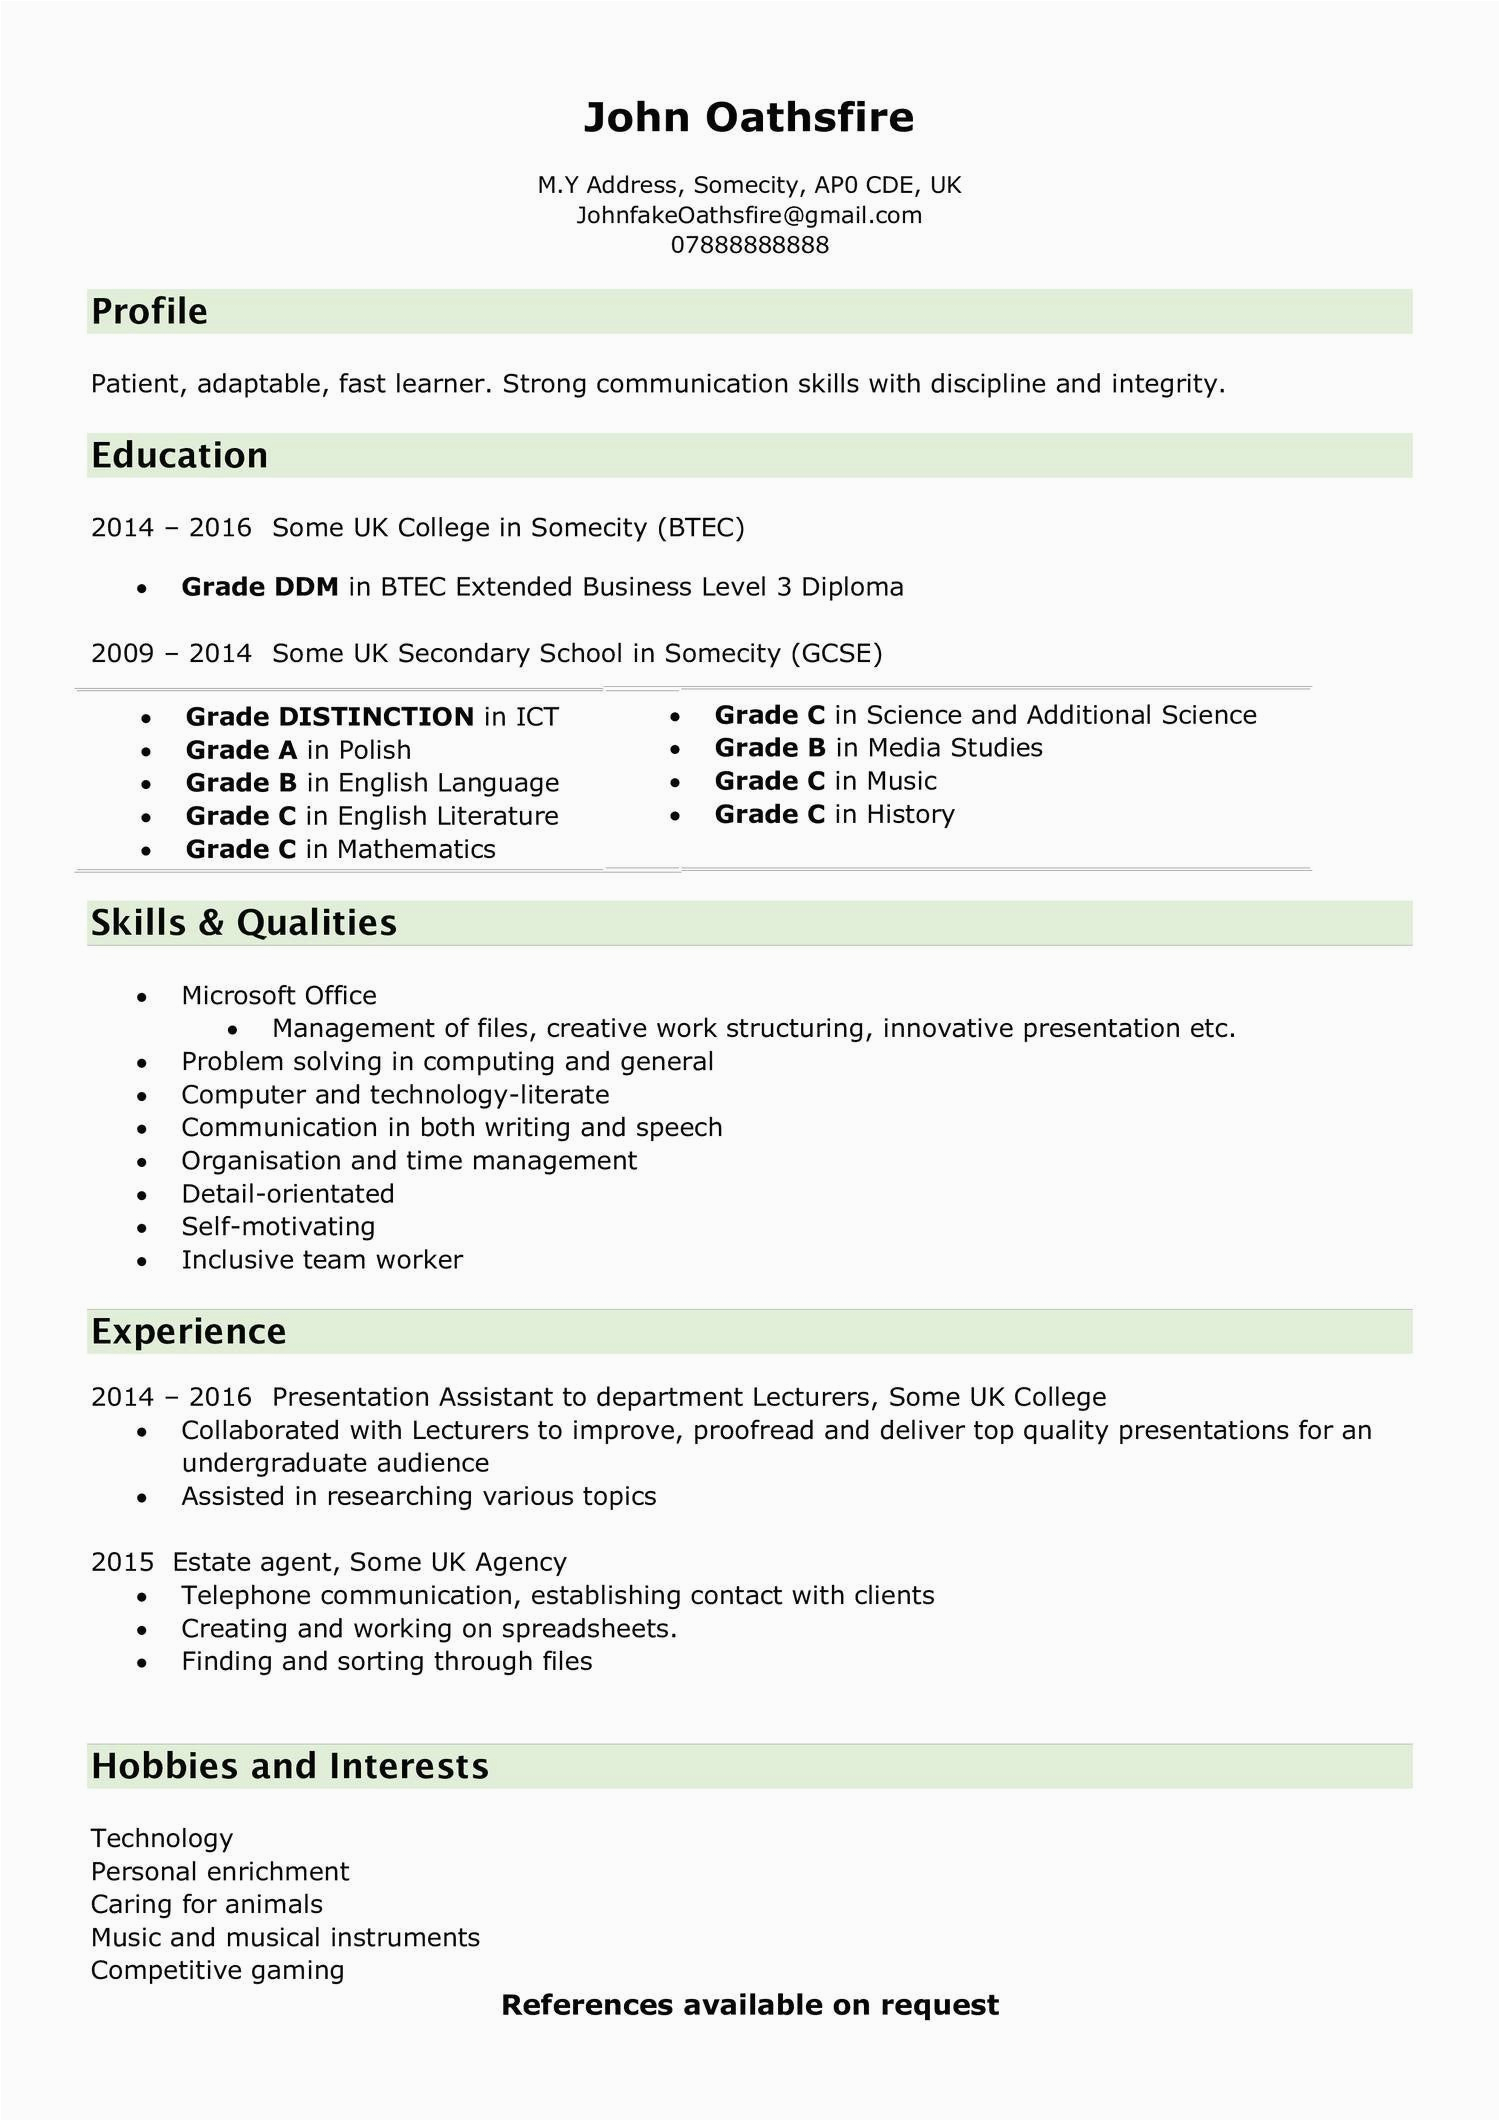 Resume Samples for 18 Year Olds Resume Of An 18 Year Old Looking for Critique On Updated Cv Follow Up